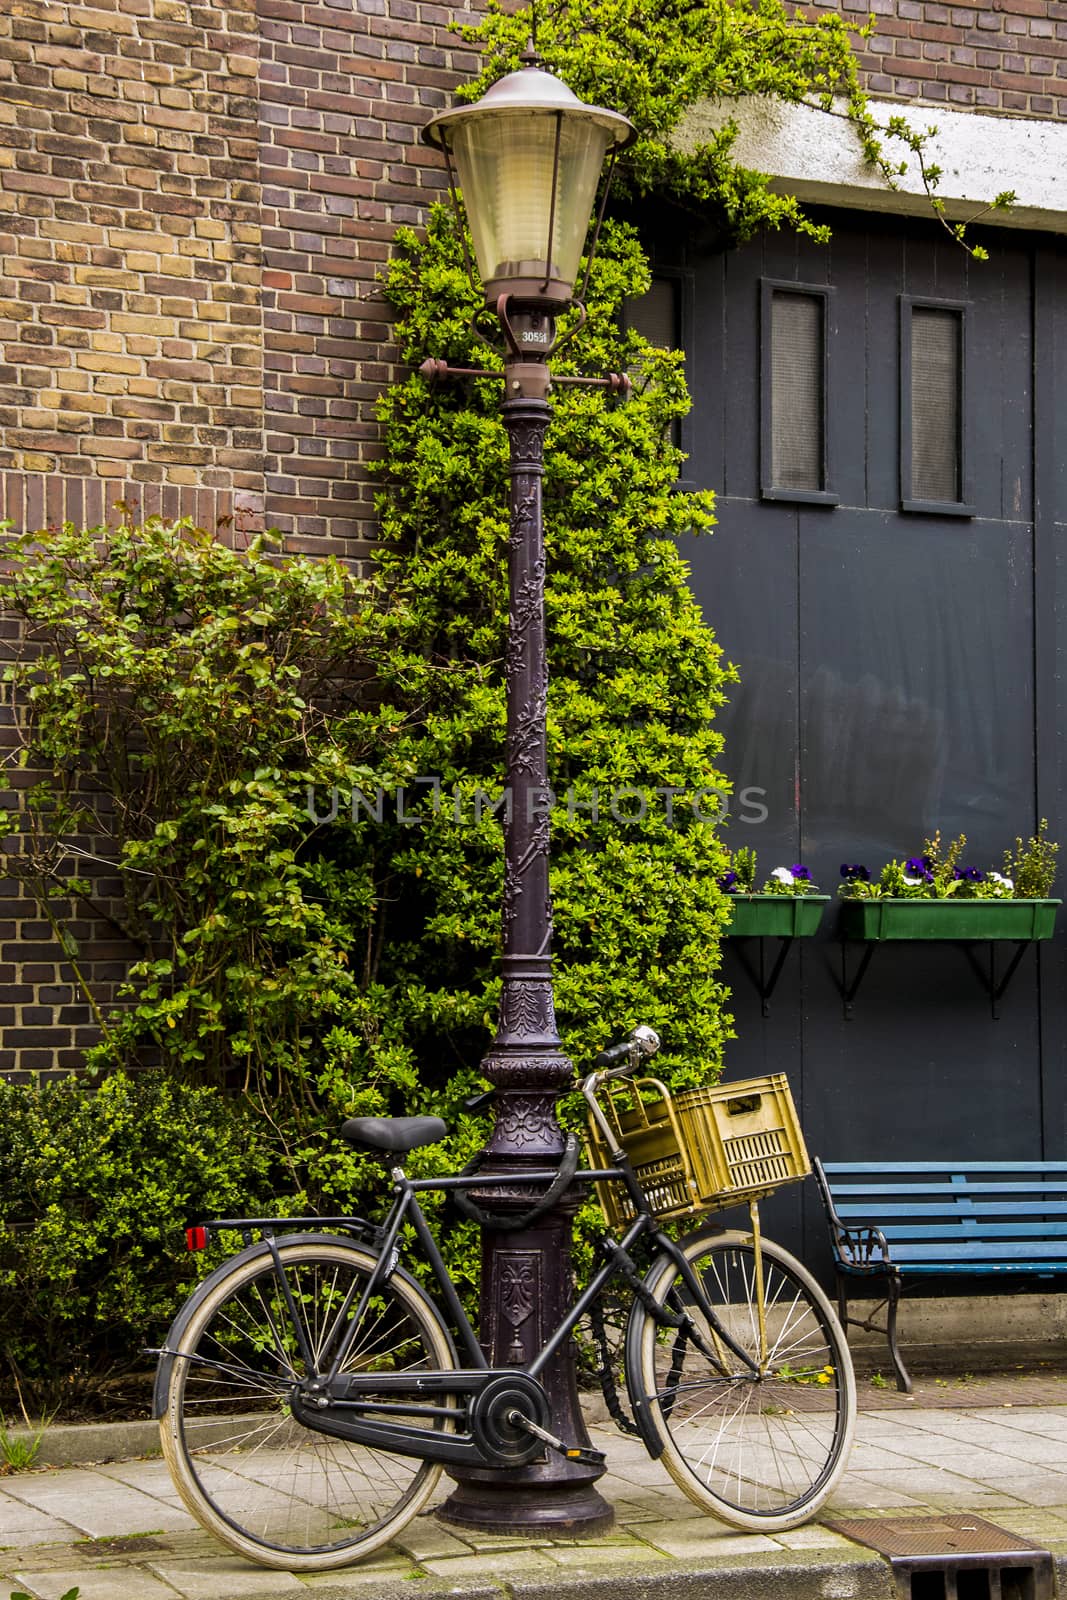 Bicycle tied on a light pole in Amsterdam by enrico.lapponi